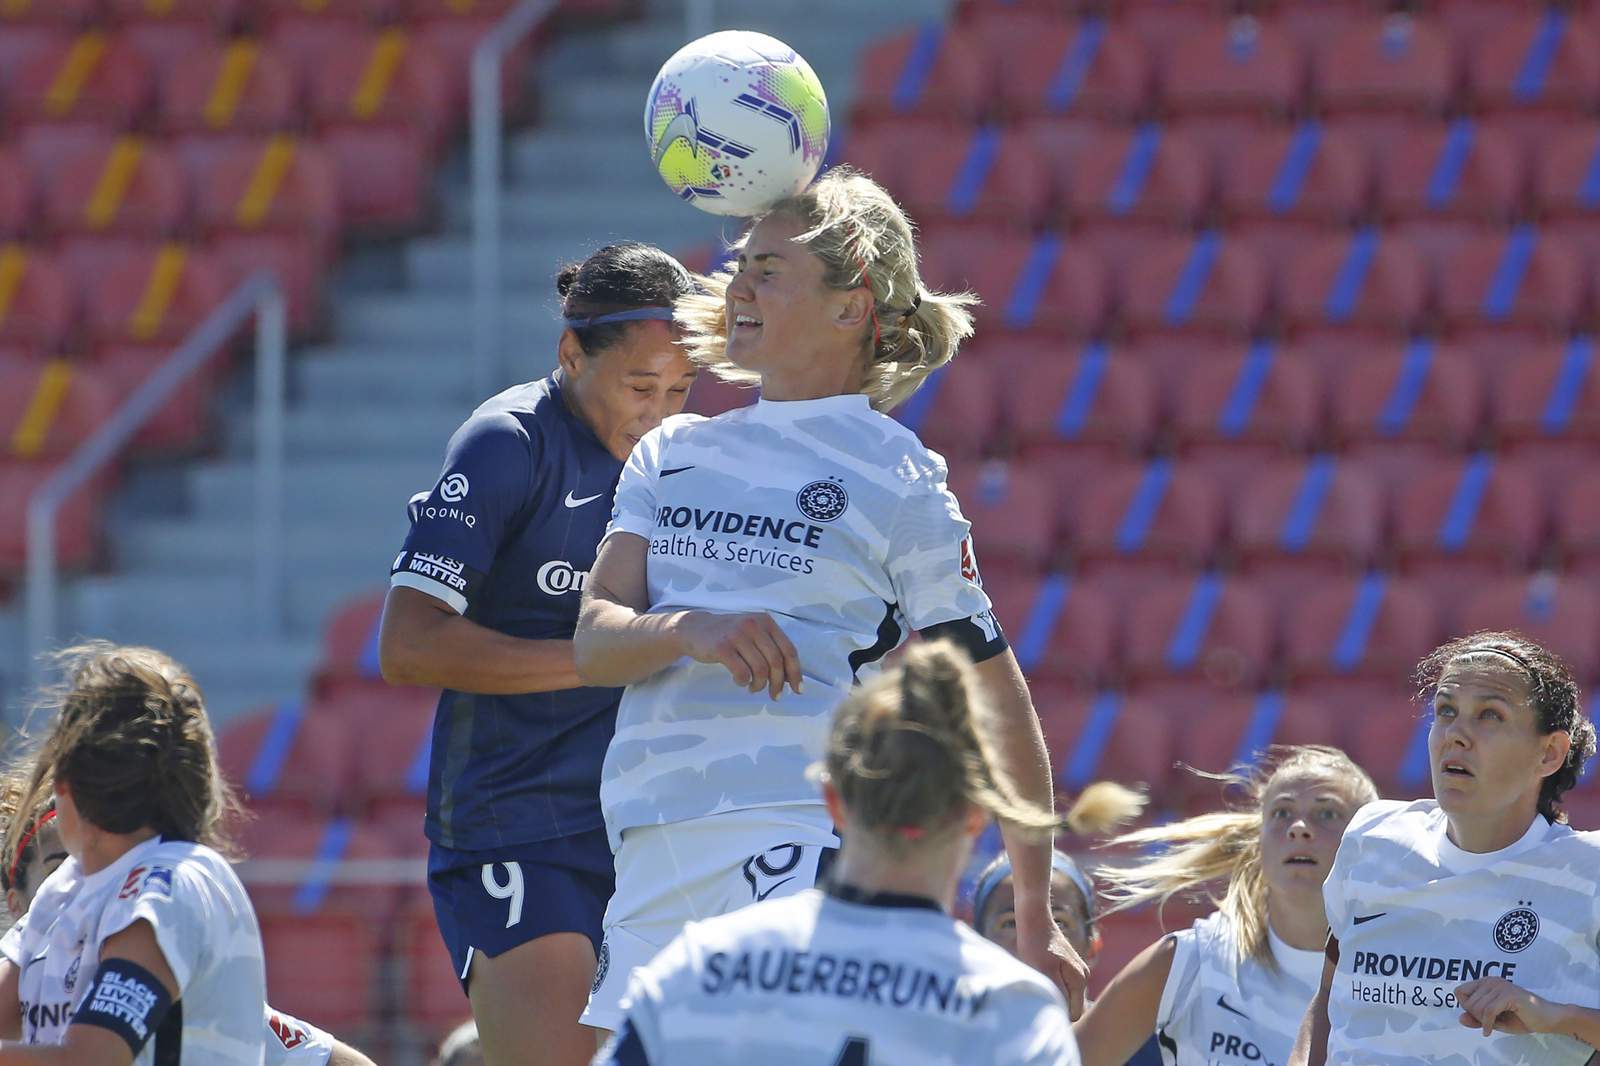 Williams' stoppage time goal lifts Courage over Thorns 2-1